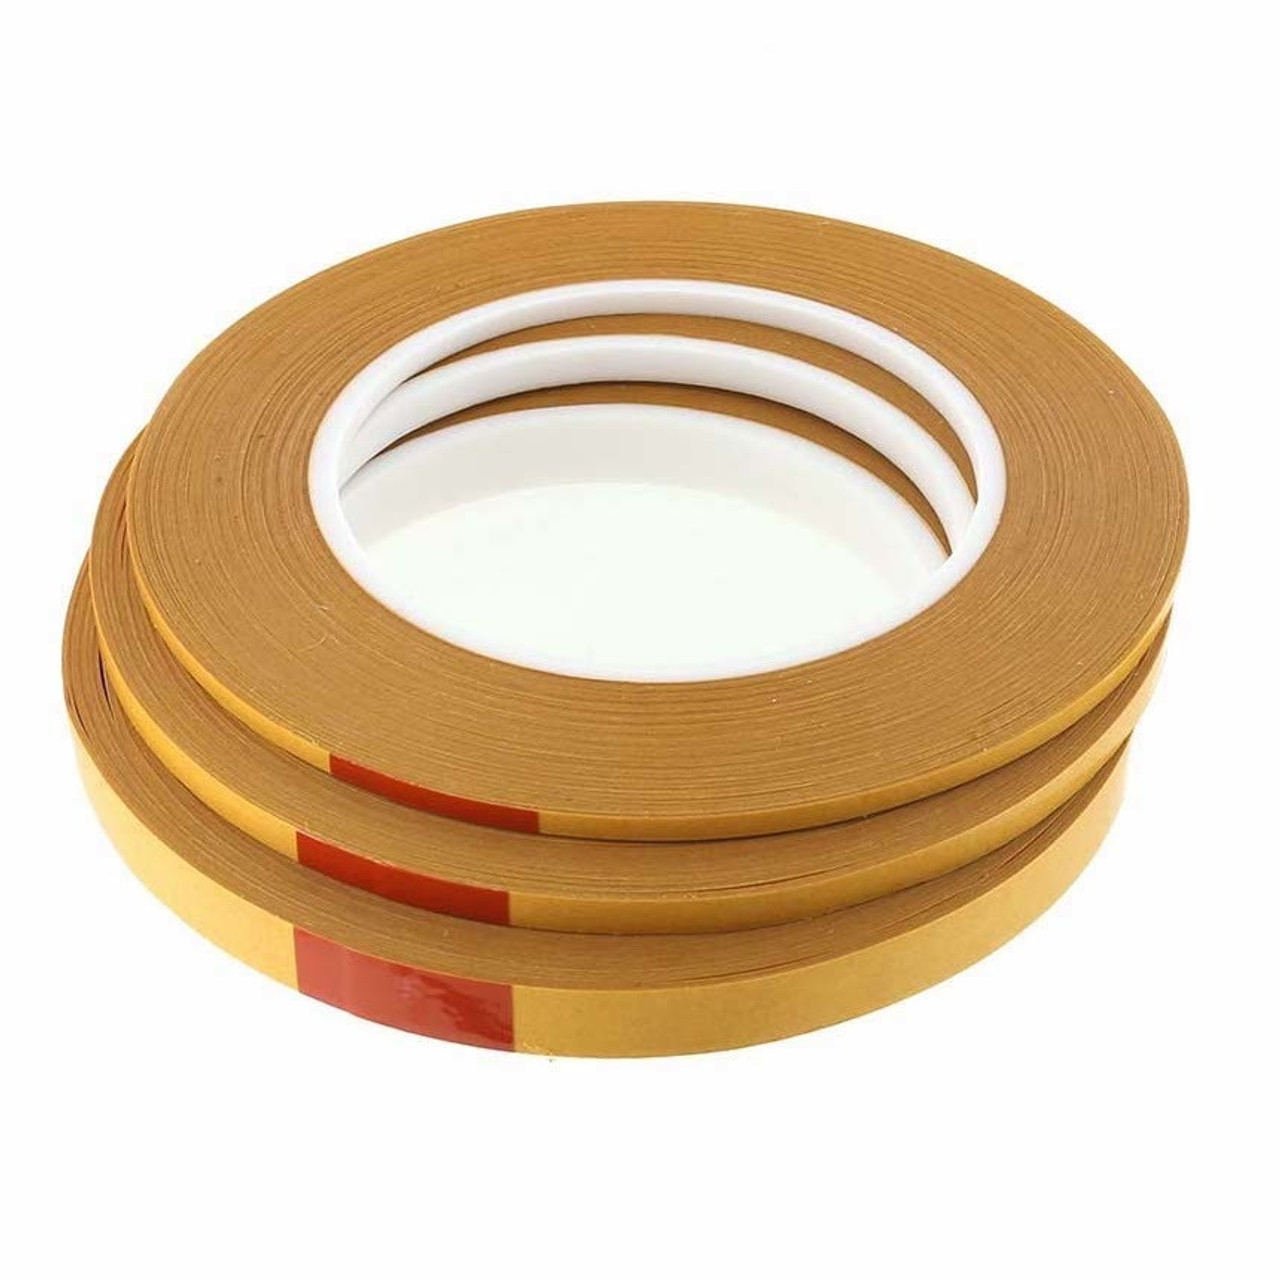 Ted's Tape, Double-Sided Permanent Adhesive Tape, (54 yards) 